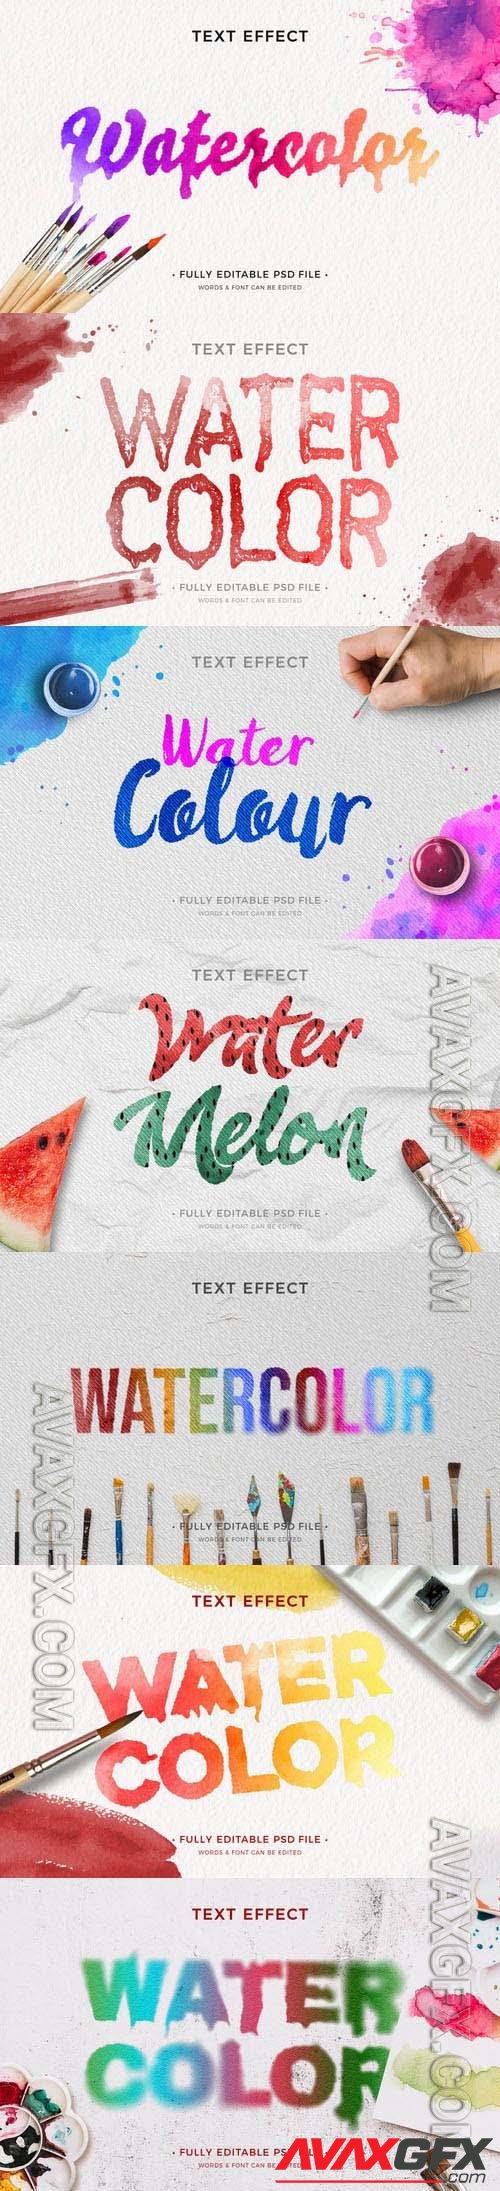 PSD watercolor text effect